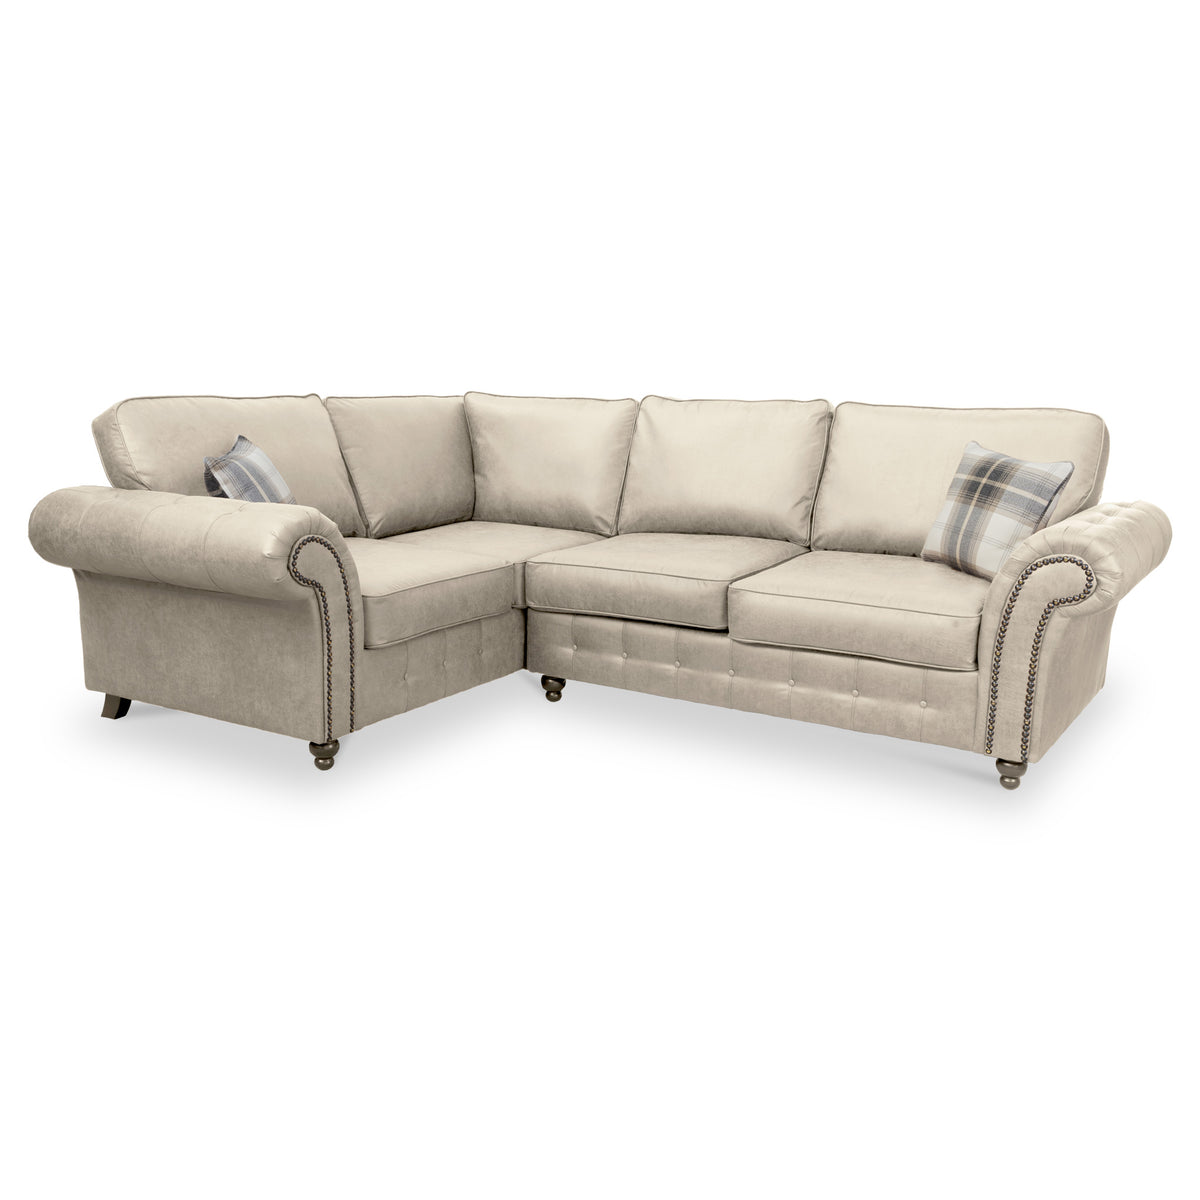 Edward Marble Faux Leather Left Hand Corner Sofa from Roseland Furniture